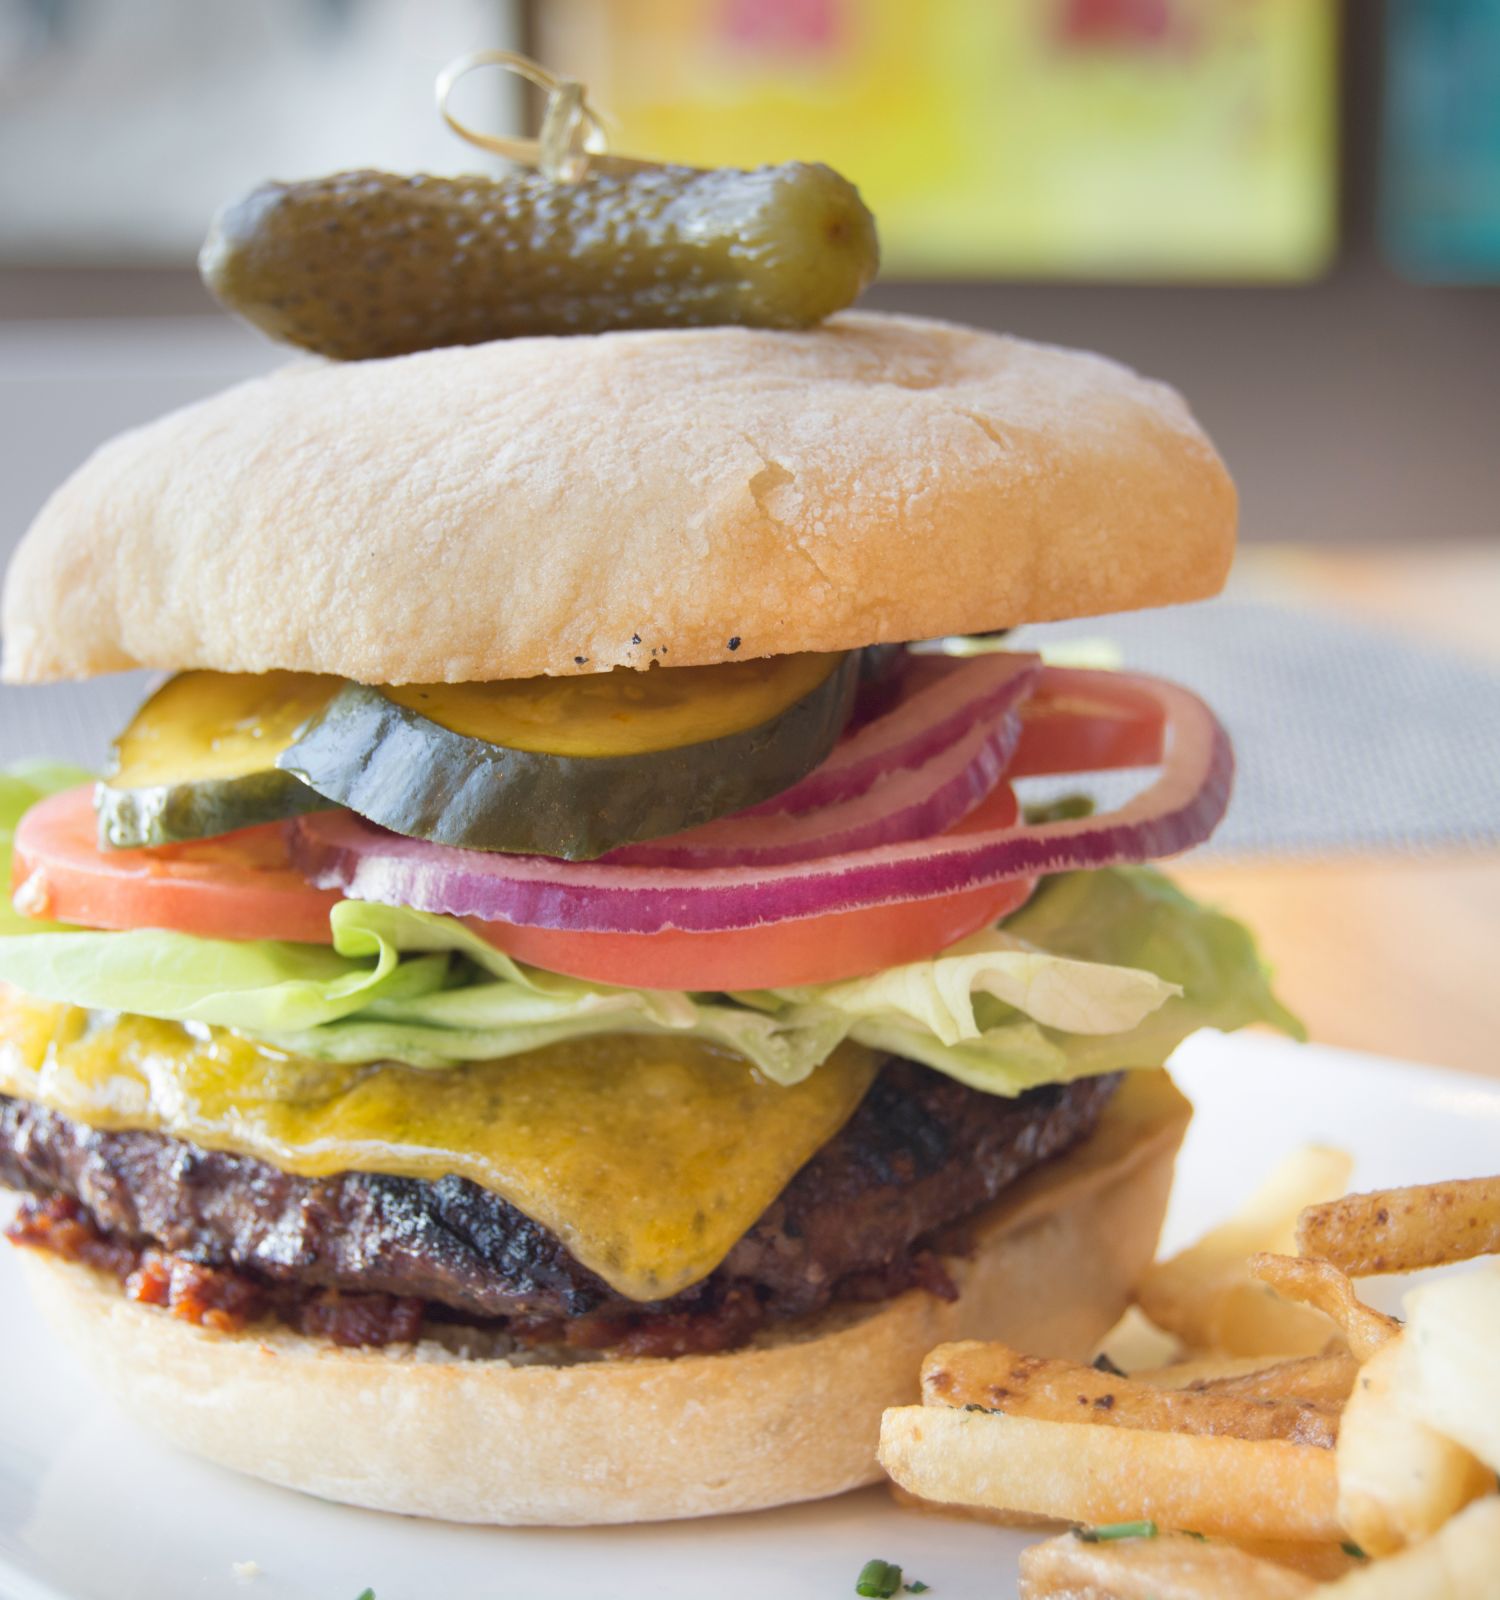 A cheeseburger with lettuce, tomato, pickles, and onion, topped with a pickle, served with fries and a drink in the background.